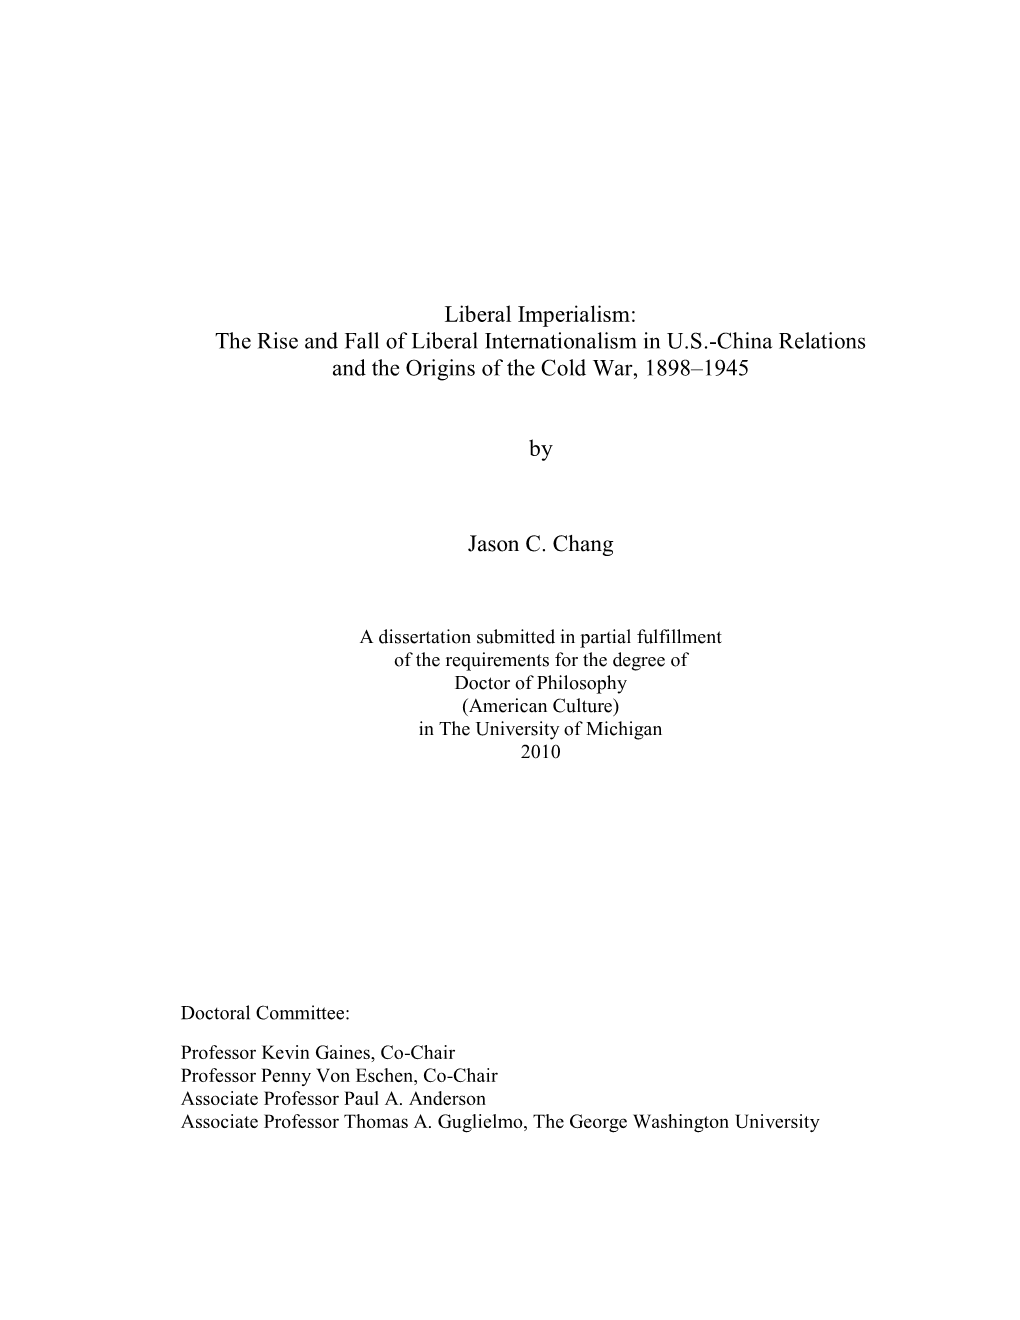 Liberal Imperialism: the Rise and Fall of Liberal Internationalism in U.S.-China Relations and the Origins of the Cold War, 1898–1945